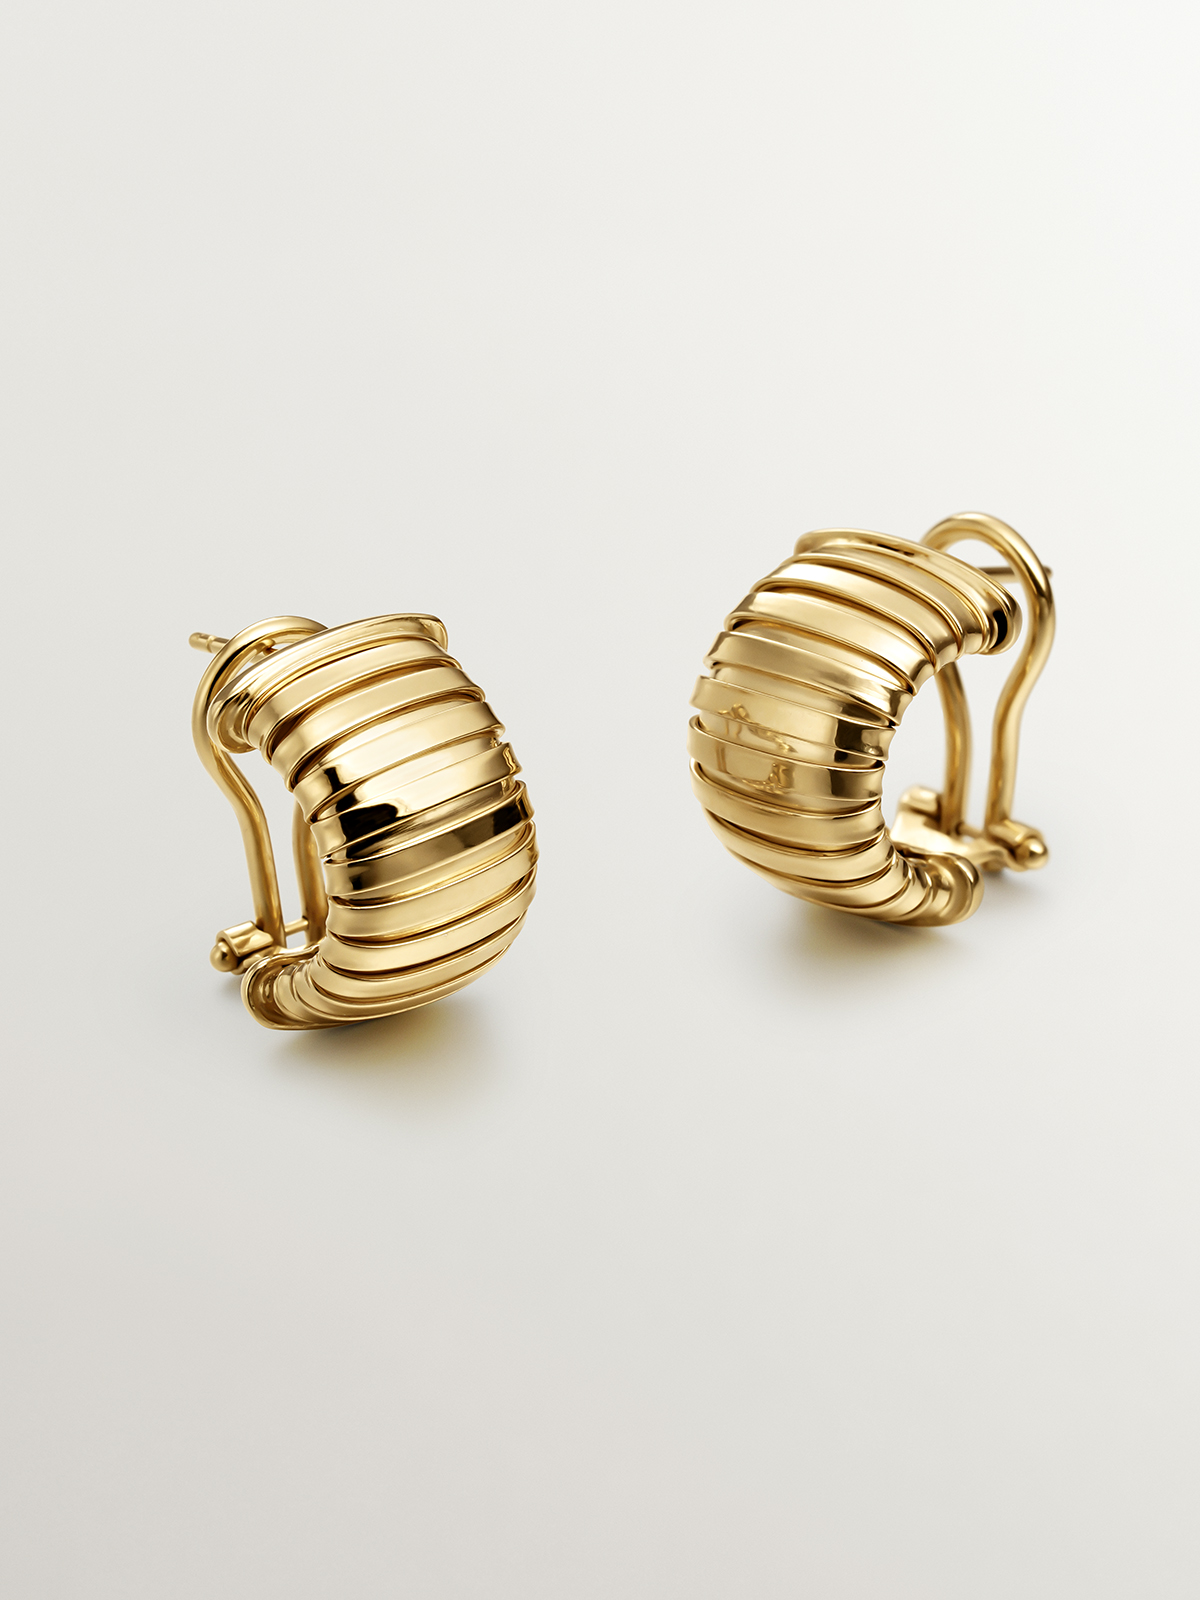 Tubogas earrings in 925 silver plated in 18K yellow gold